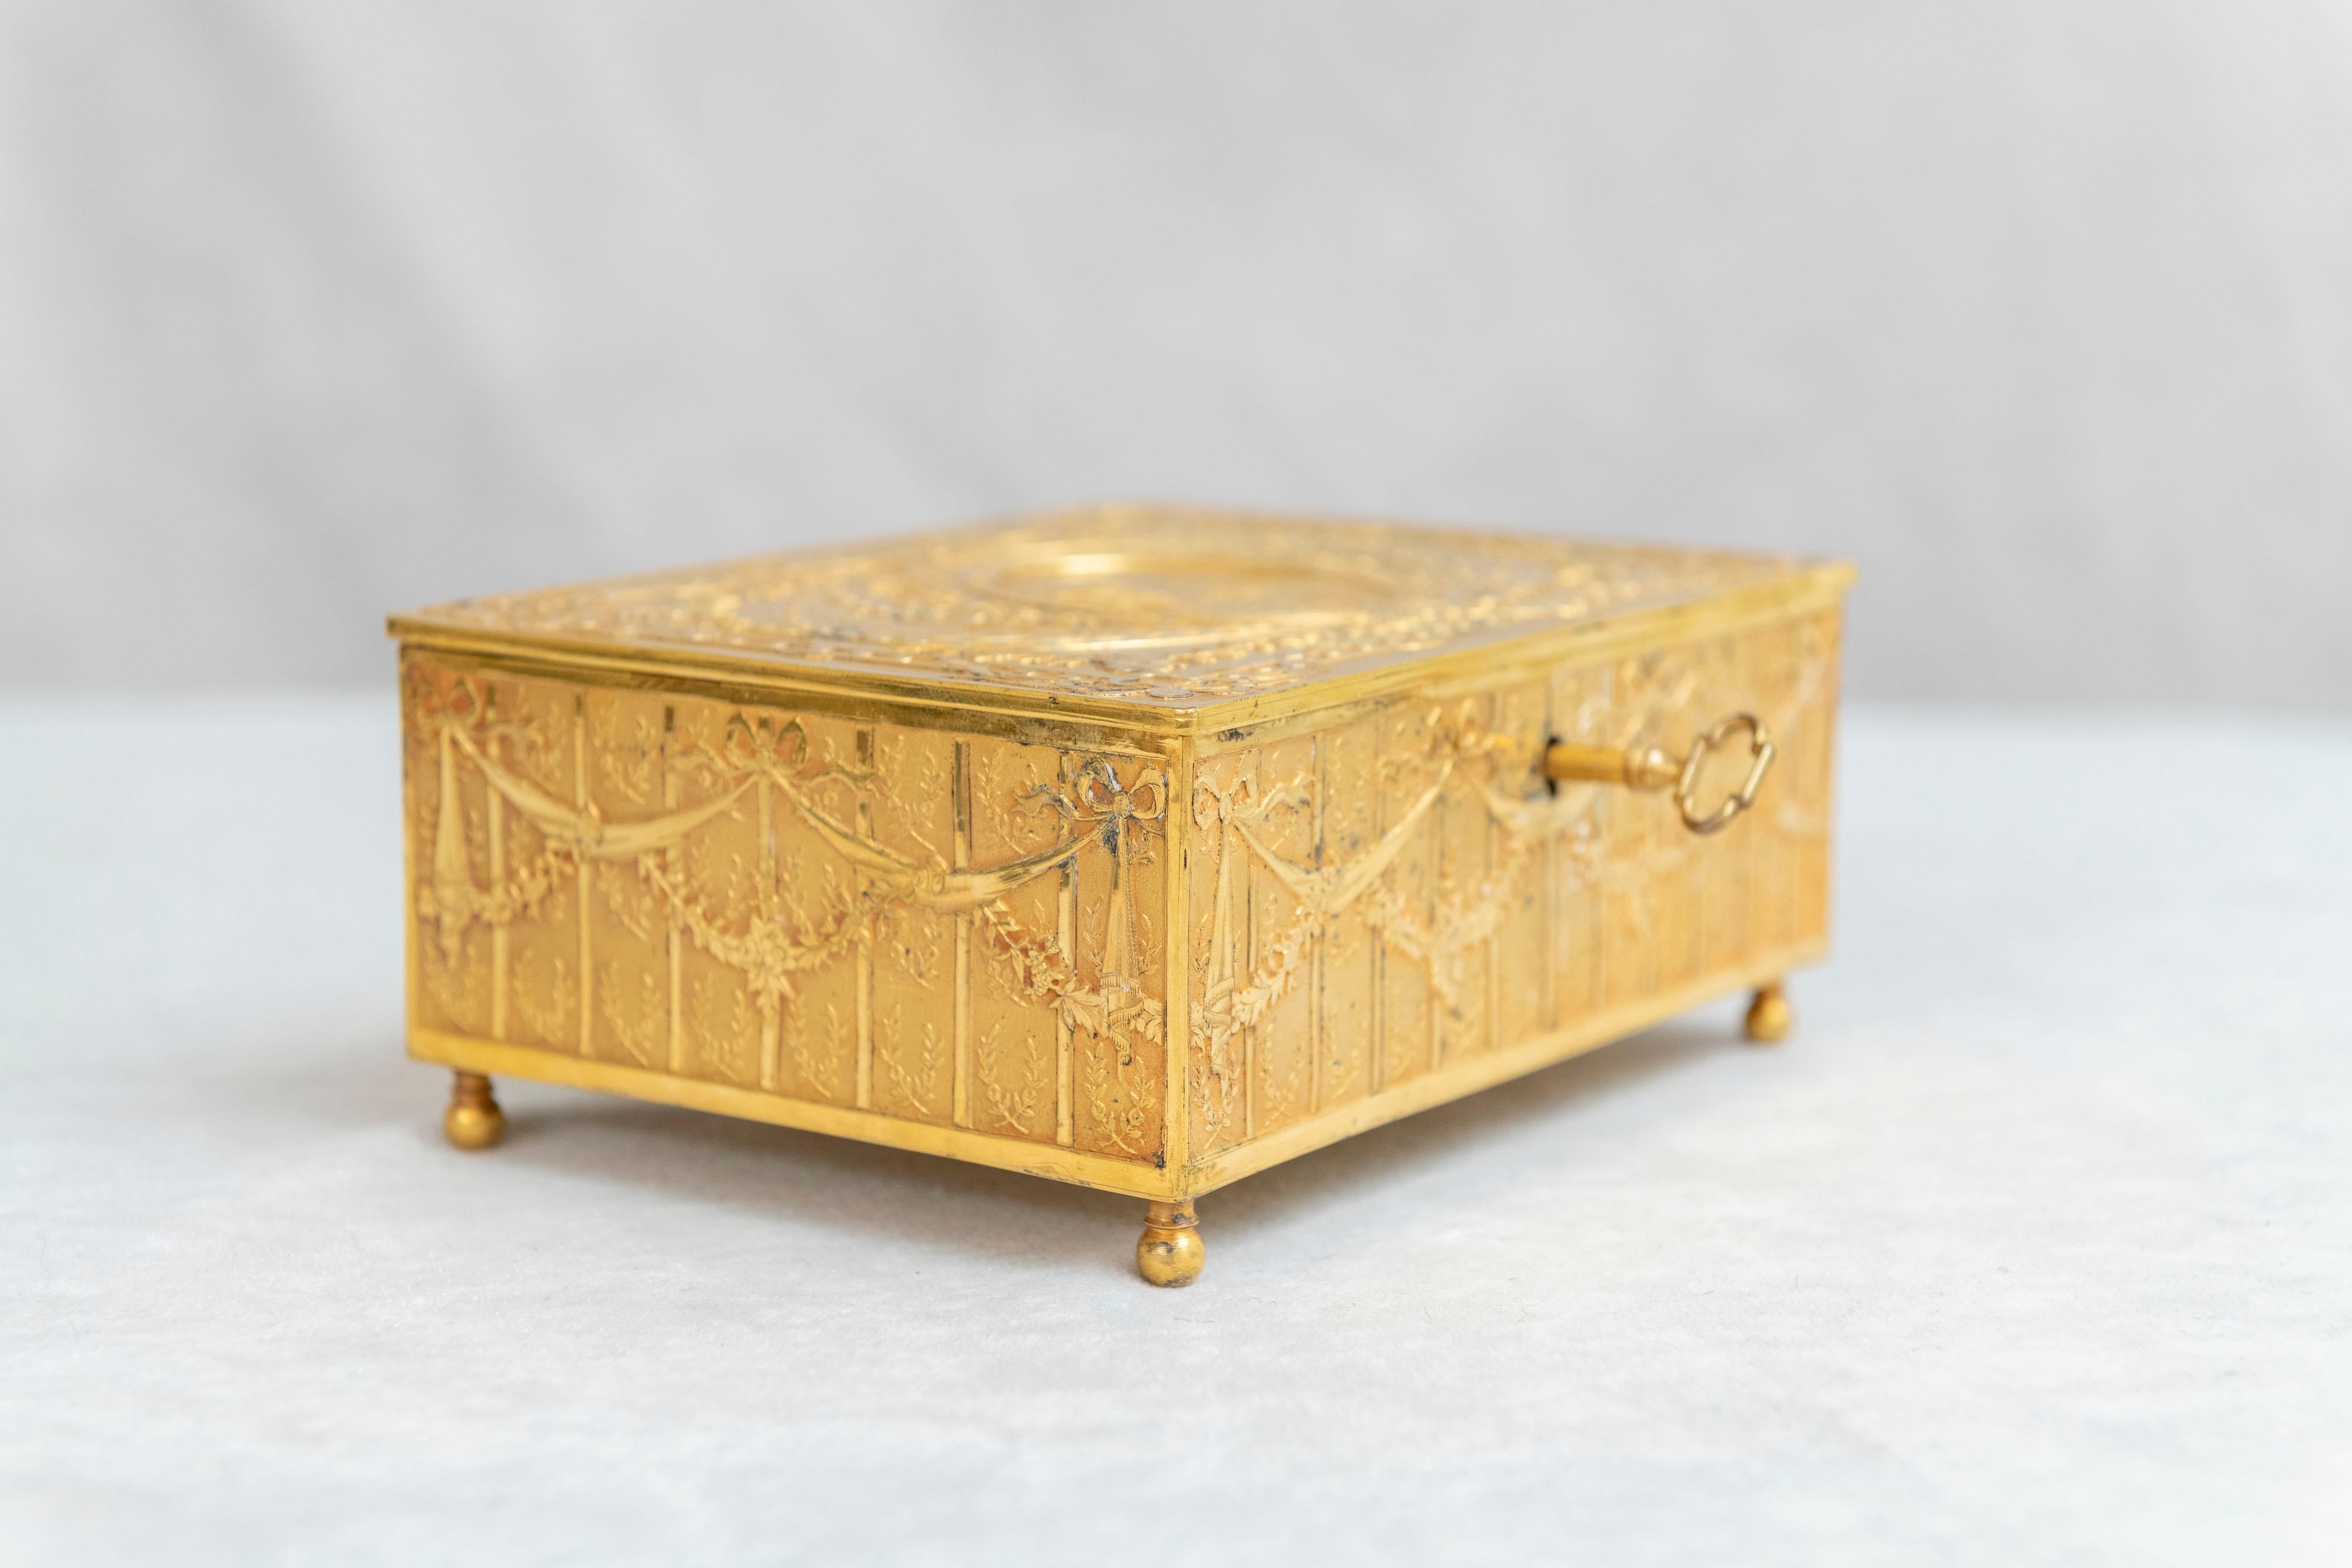 French Gilt Bronze Jewelry Box circa 1900 with Original Key Neoclassical Revival 3